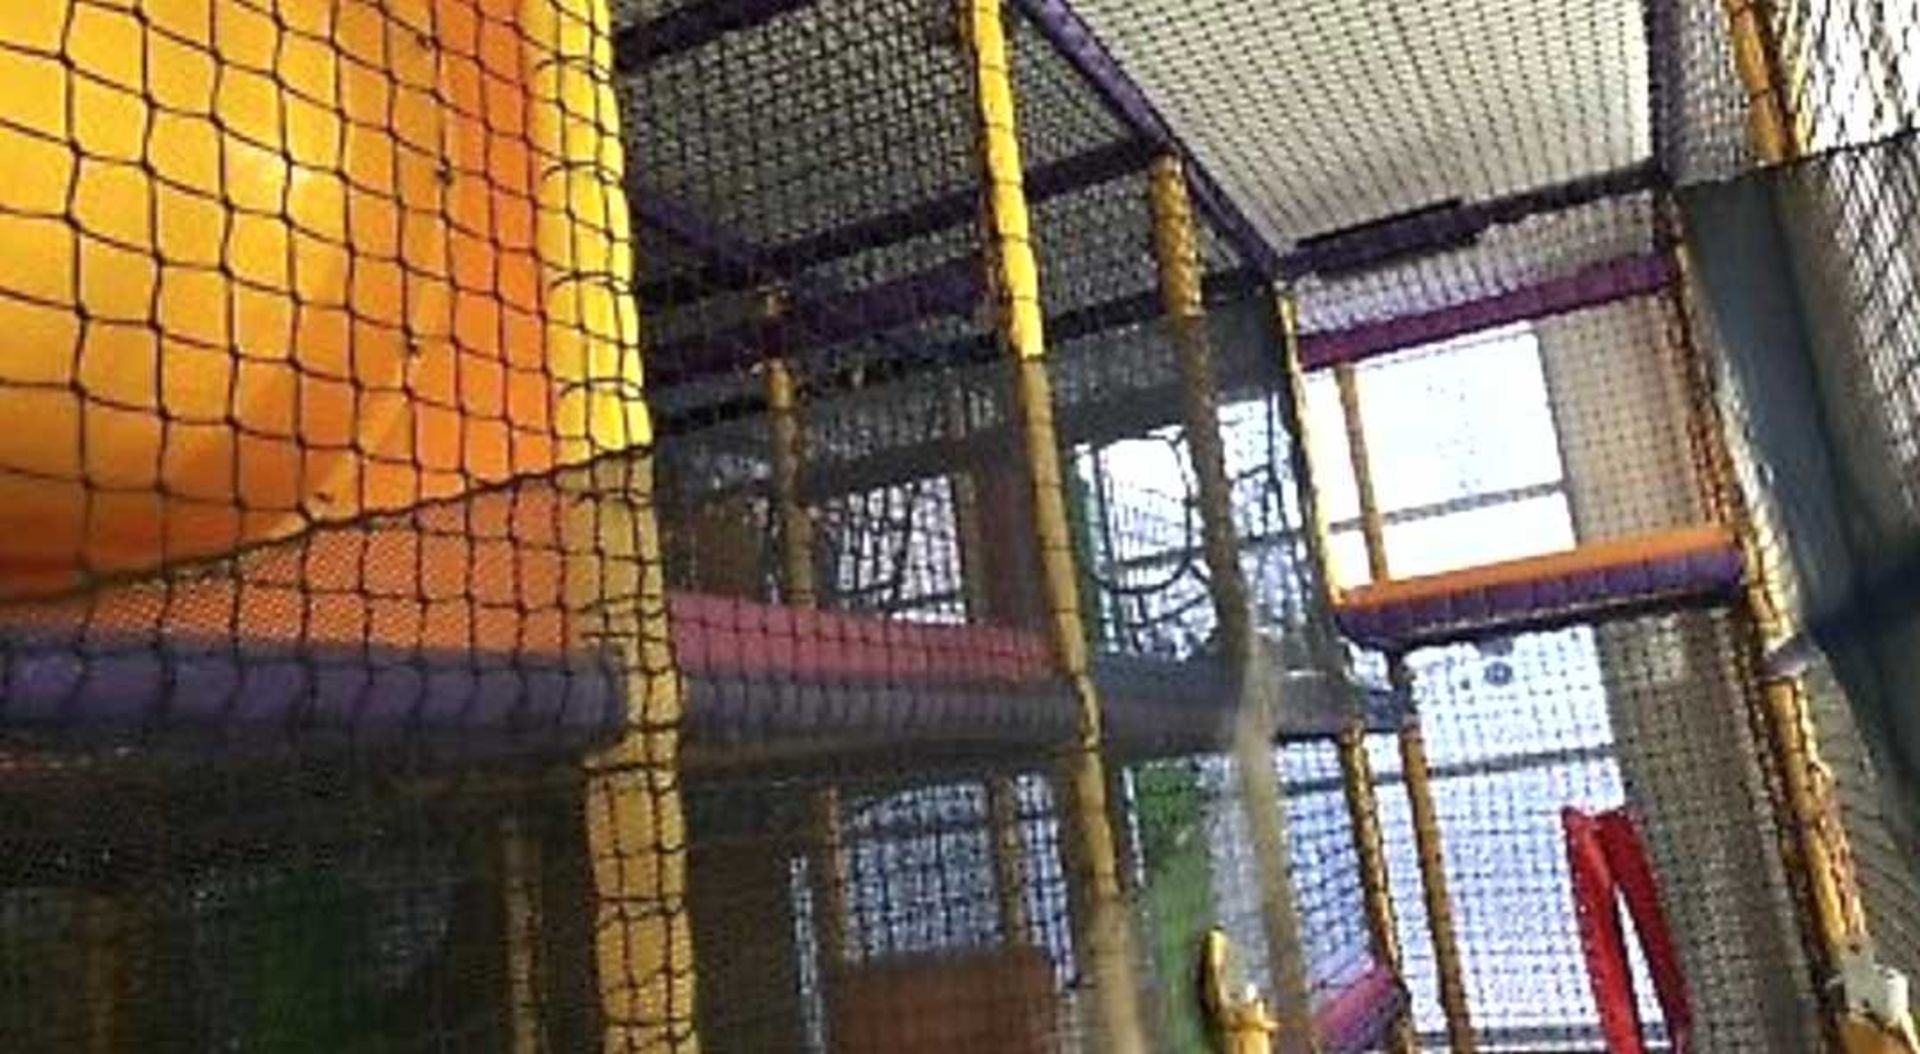 Play gym business - Image 4 of 8